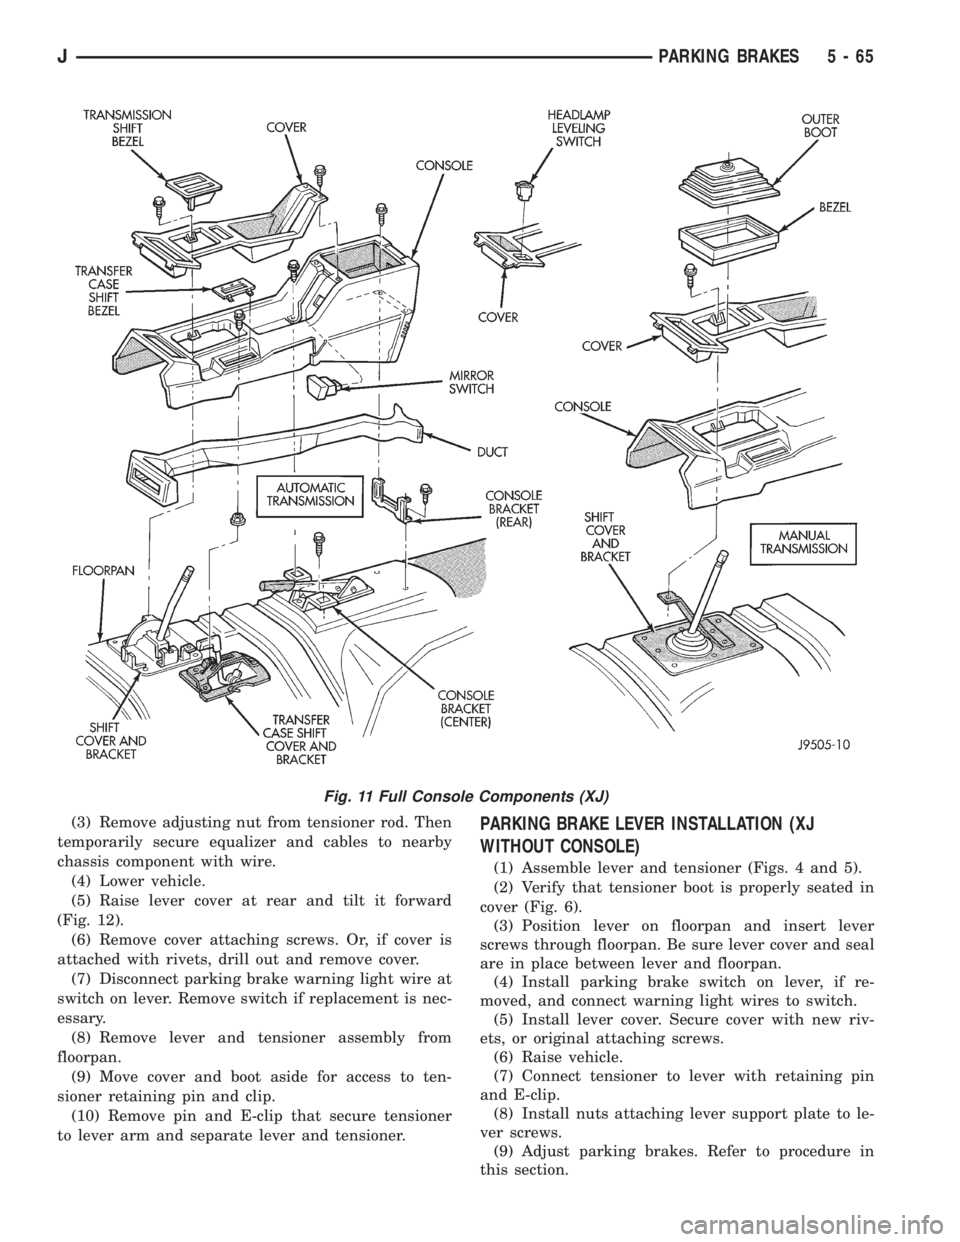 JEEP XJ 1995  Service And Repair Manual (3) Remove adjusting nut from tensioner rod. Then
temporarily secure equalizer and cables to nearby
chassis component with wire.
(4) Lower vehicle.
(5) Raise lever cover at rear and tilt it forward
(F